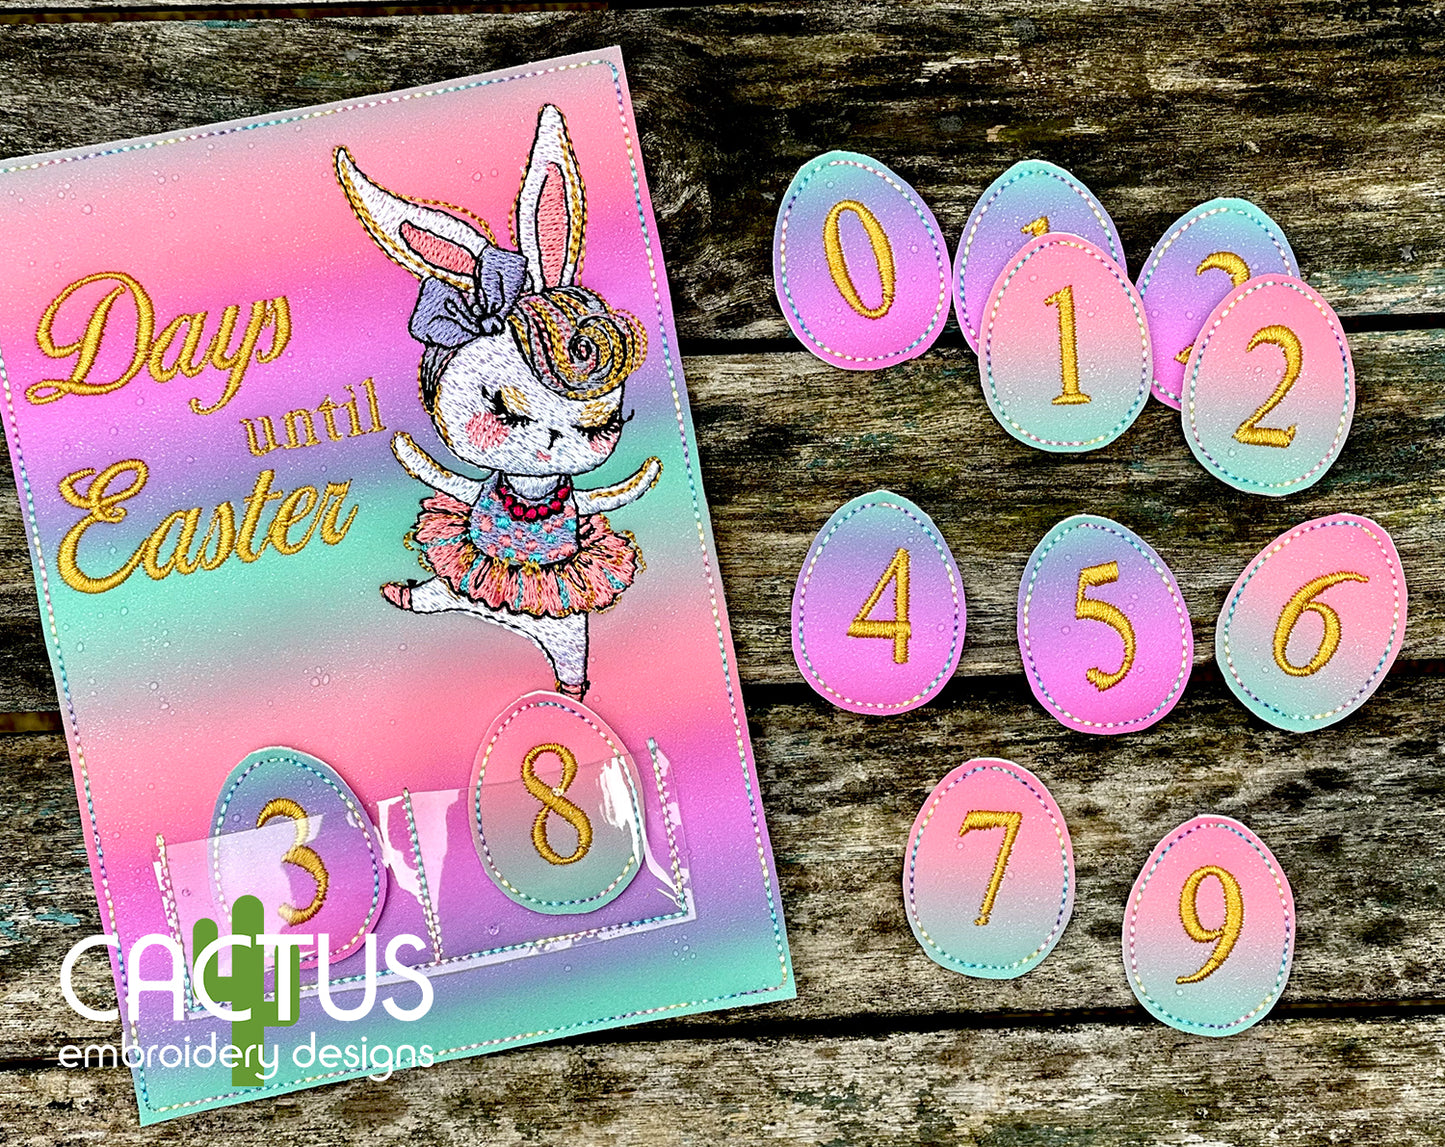 Days until Easter Countdown Embroidery Design